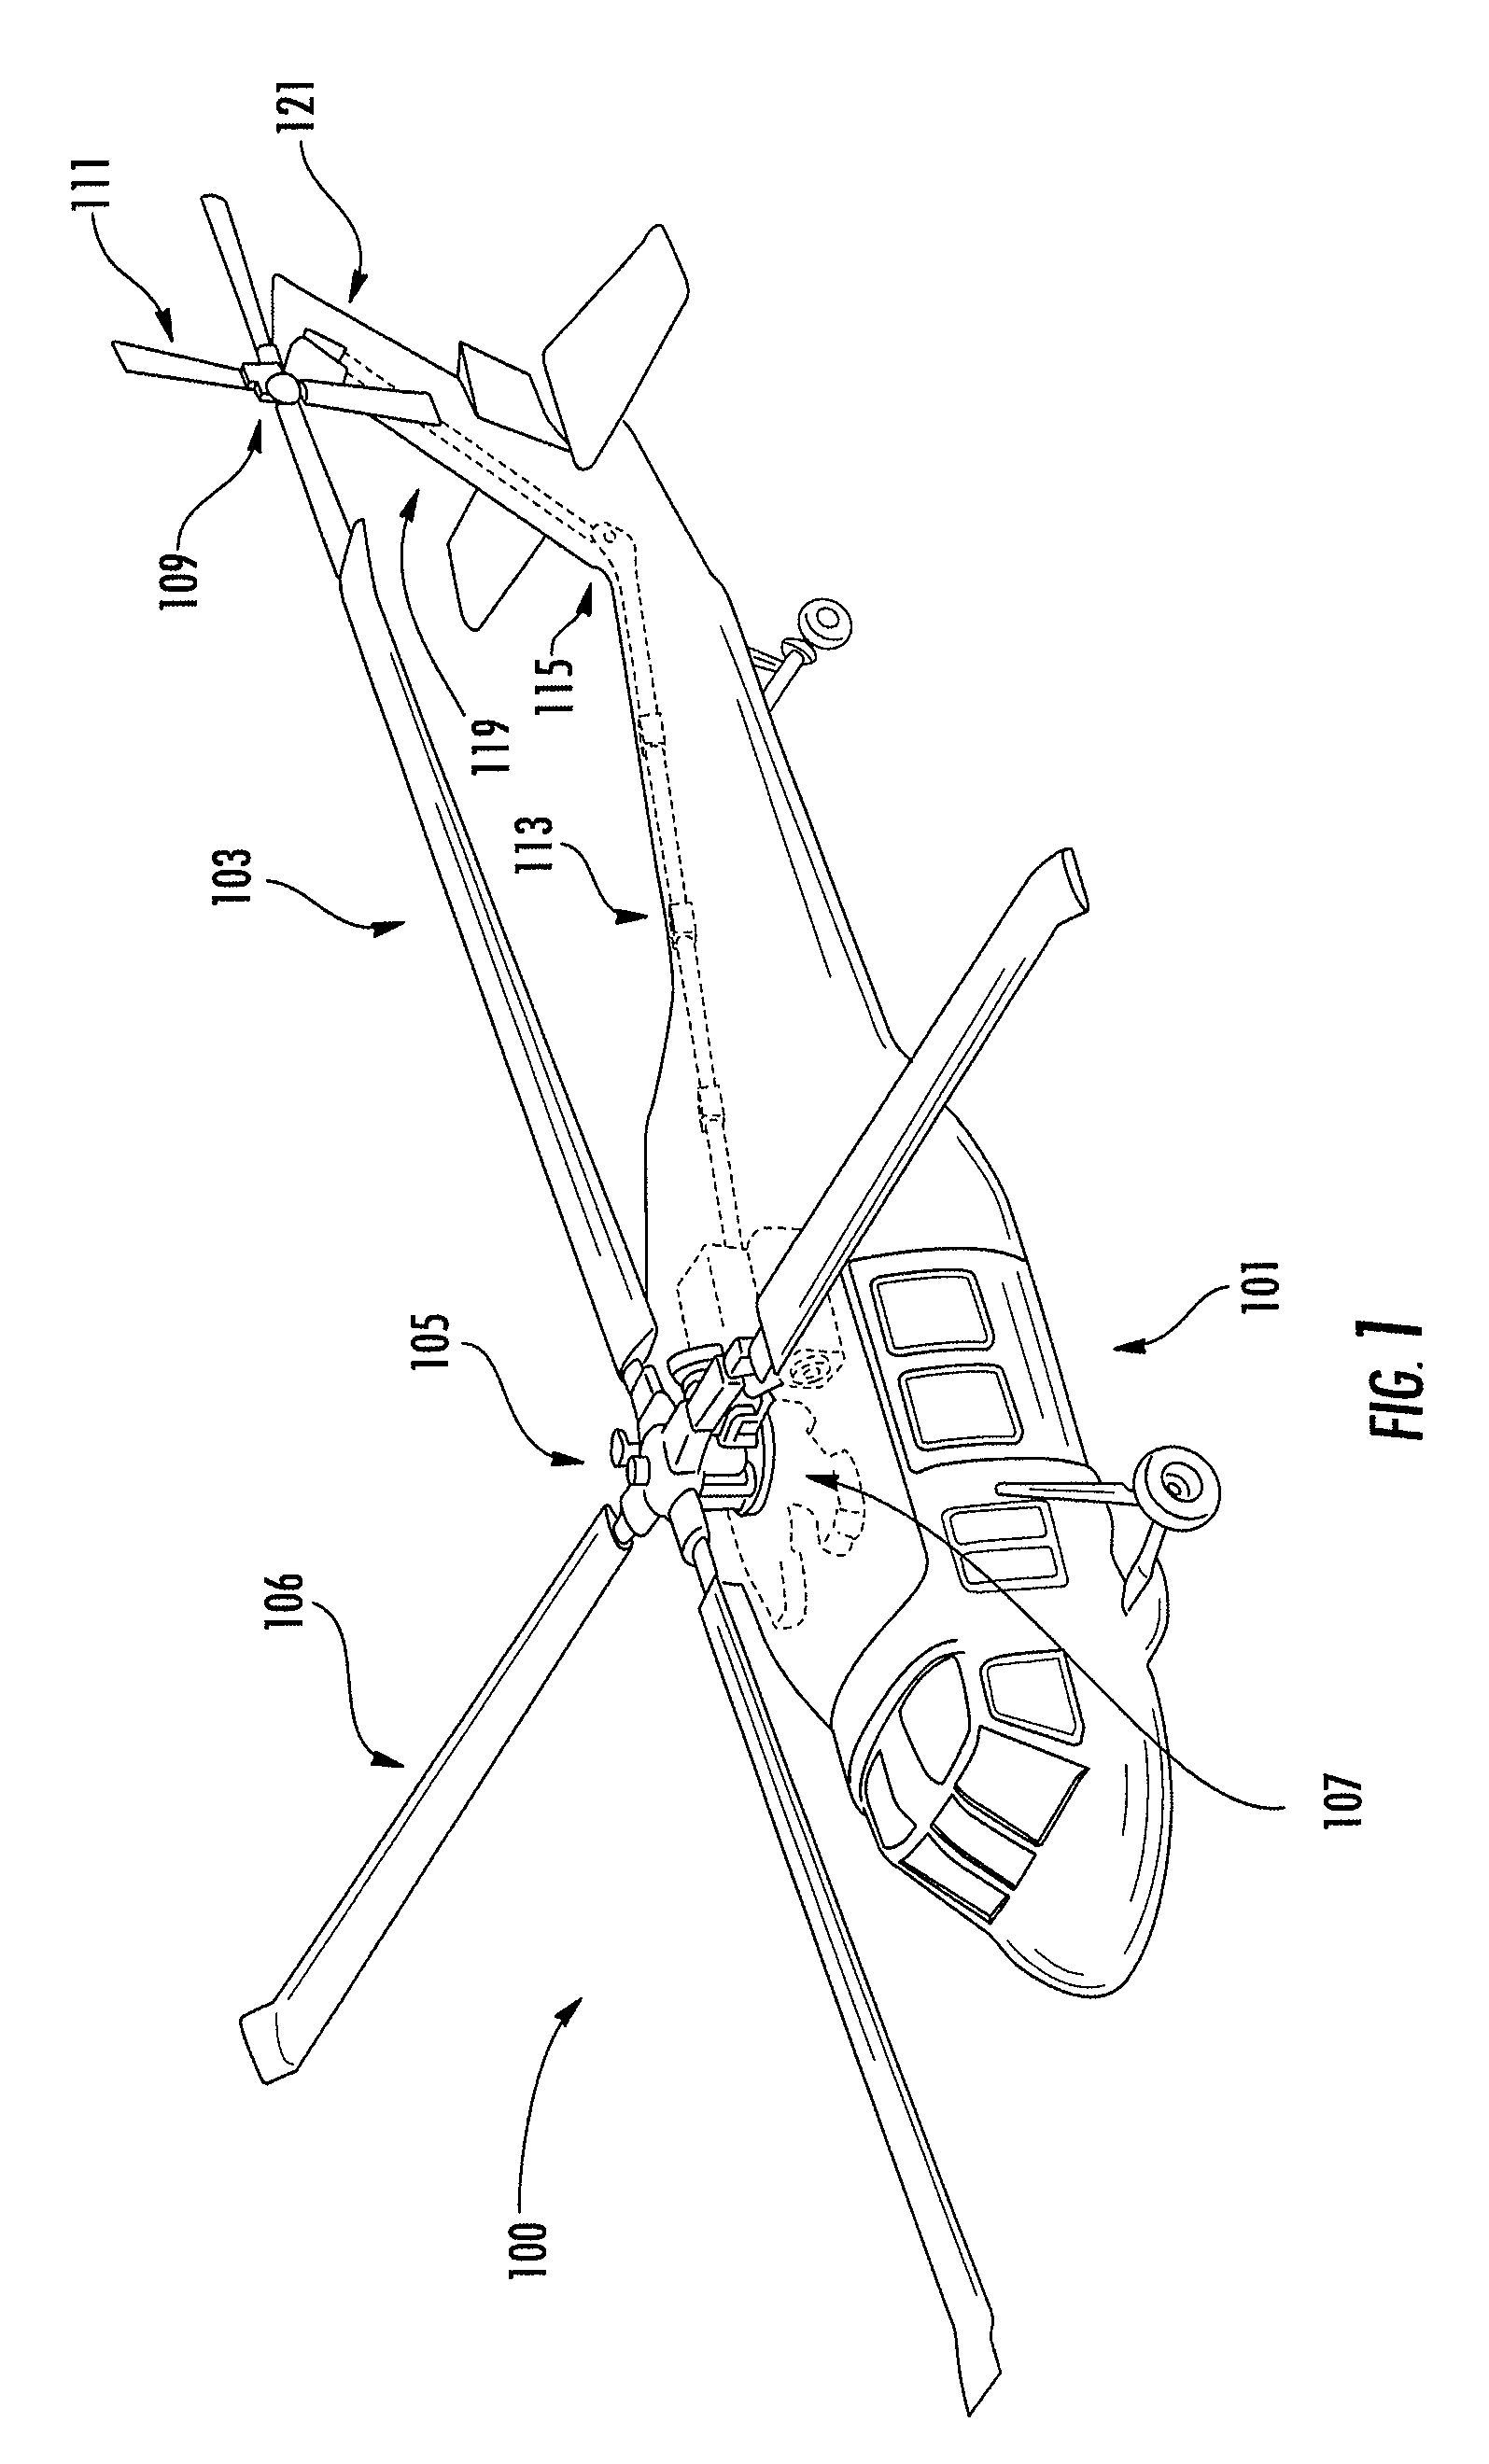 Vehicle health and usage monitoring system and method